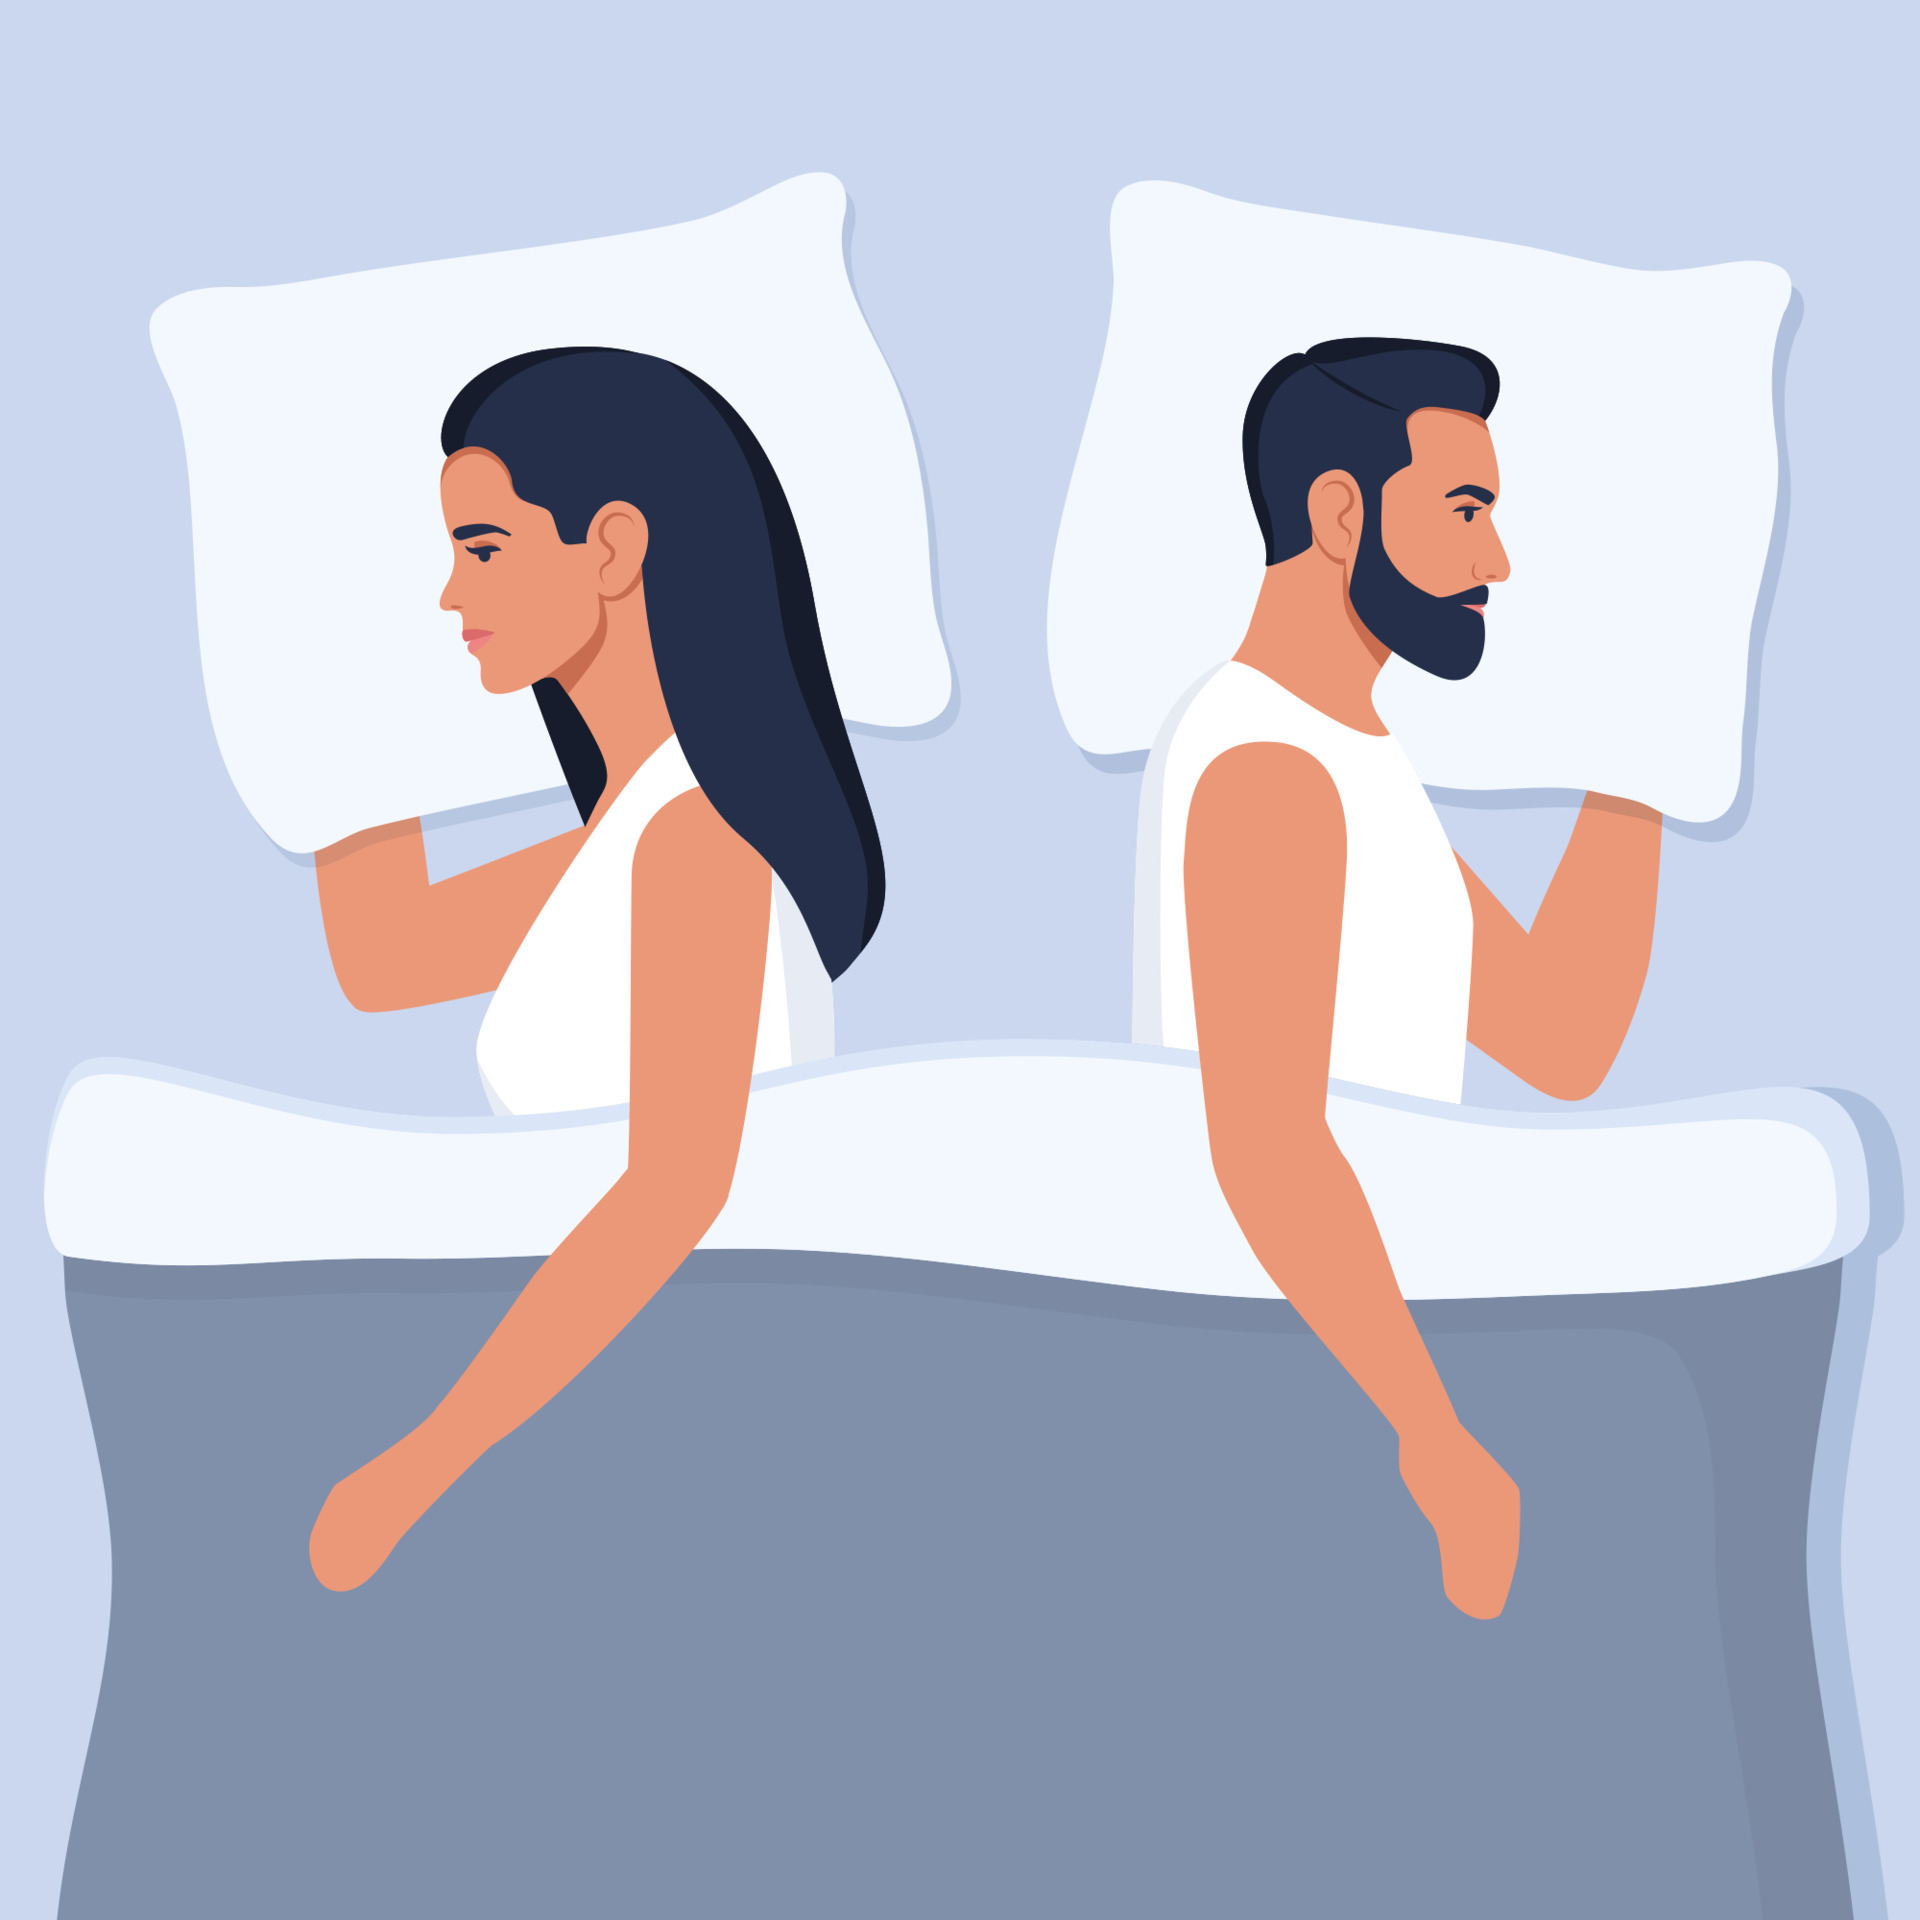 Young couple on bed turned back each other. Intimate, depressed couple, married or sexual problems. Misunderstanding, disagreement, relationship troubles. Man and woman in quarrel